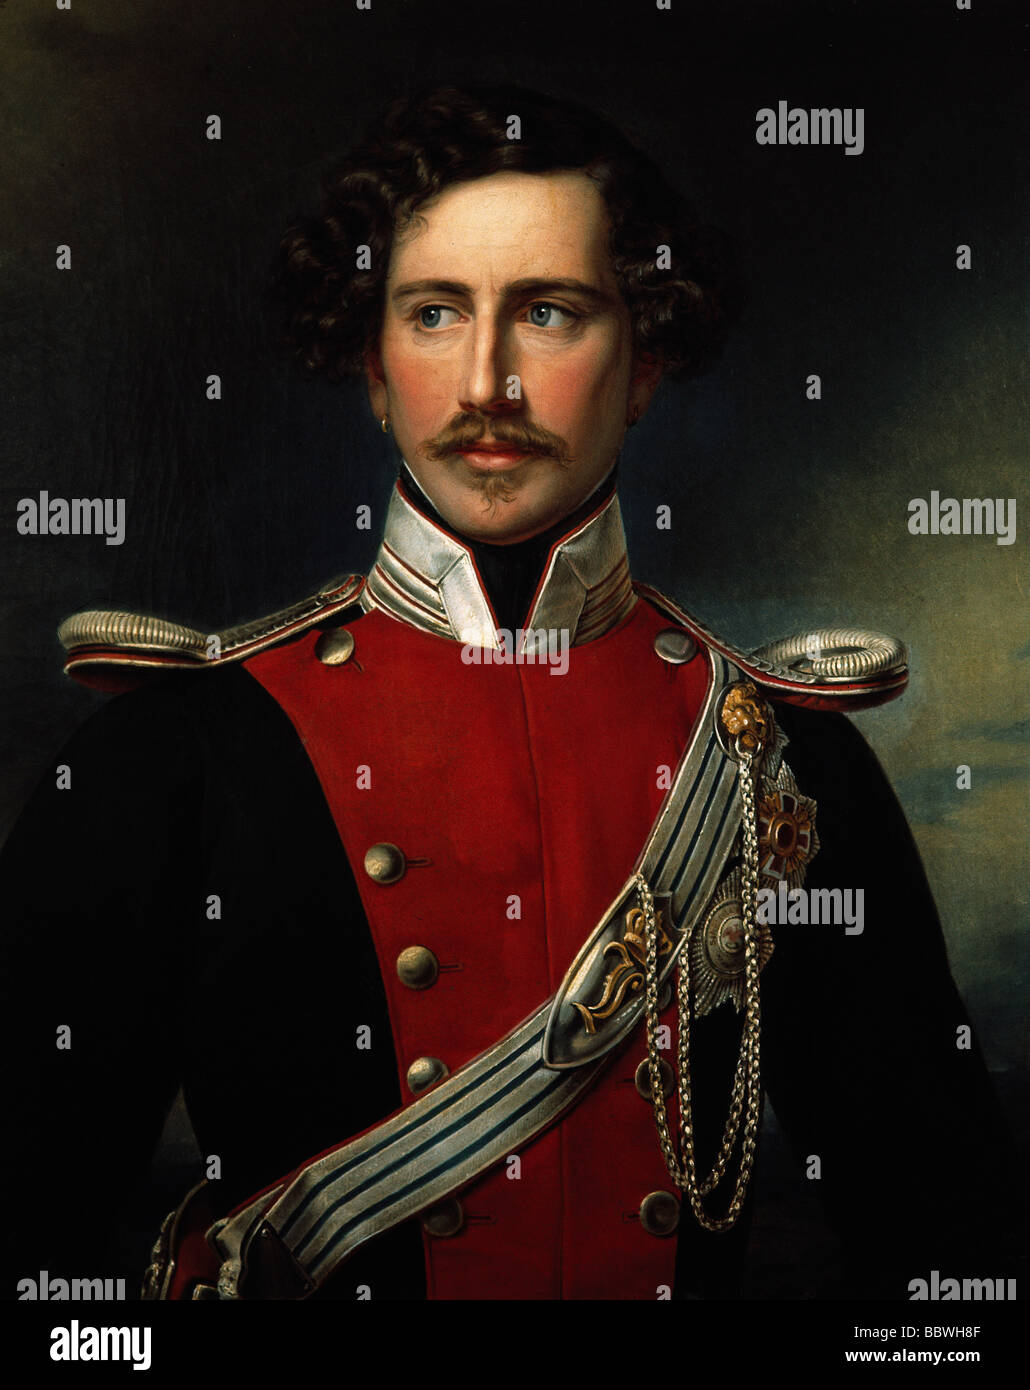 Thurn und Taxis, Maximilian Karl Prince of, 3.11.1802 - 11.1.1871, portrait, as colonel of the Bavarian Light Cavalry Regiment No. 2 'Taxis', painting, oil on canvas, Stock Photo